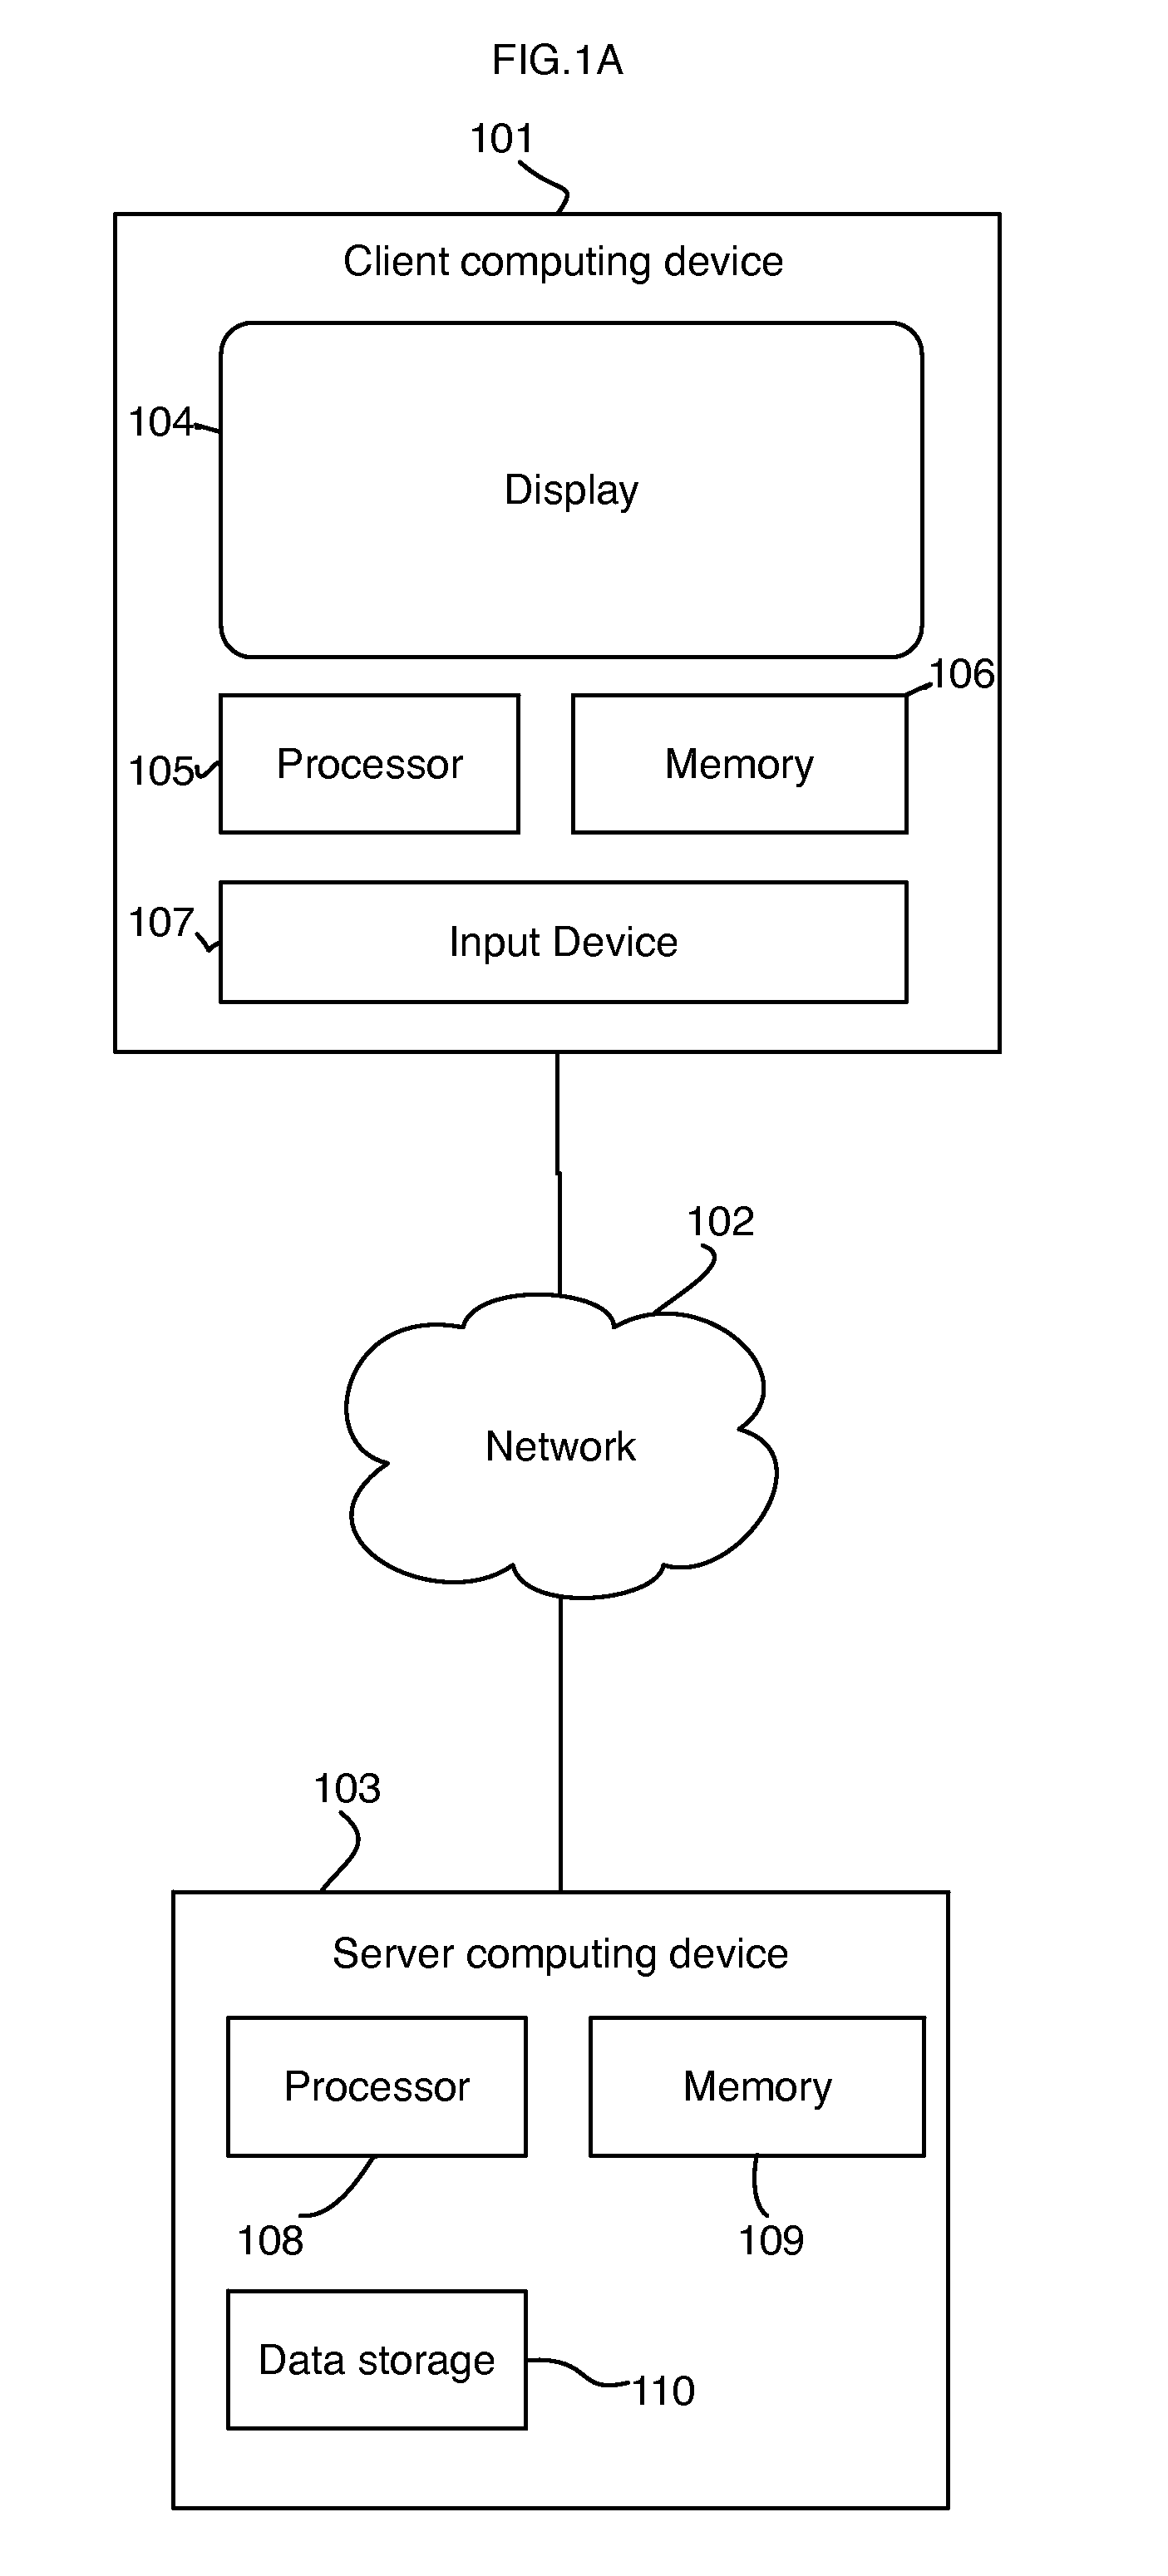 Method and System for Computer-Based Assessment Including a Search and Select Process